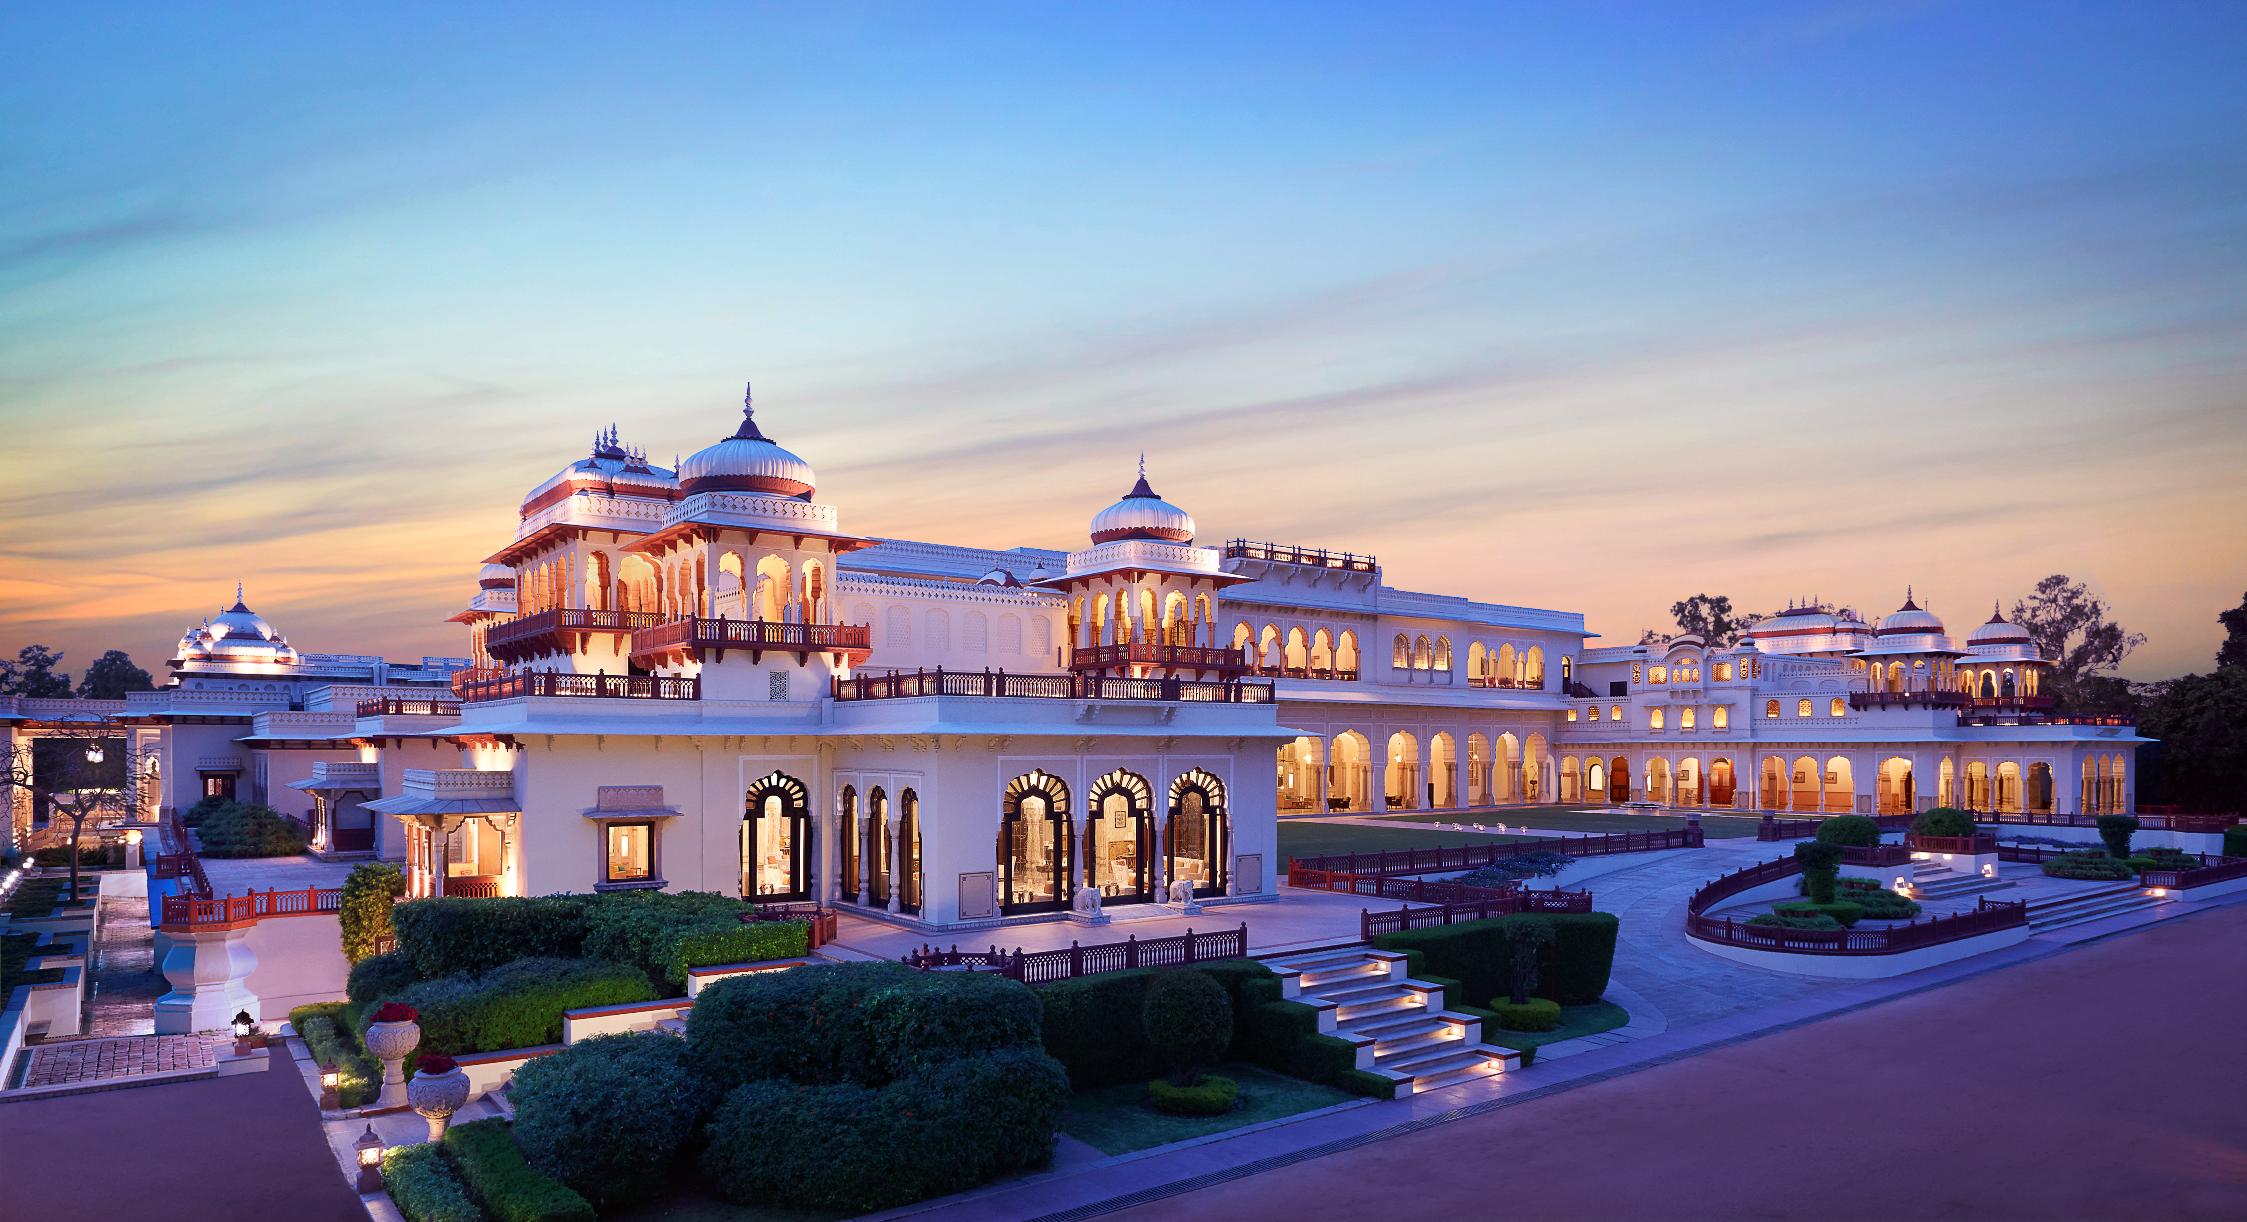 JAIPUR’S RAMBAGH PALACE BAGS THE BEST LUXURY HOTEL AWARD